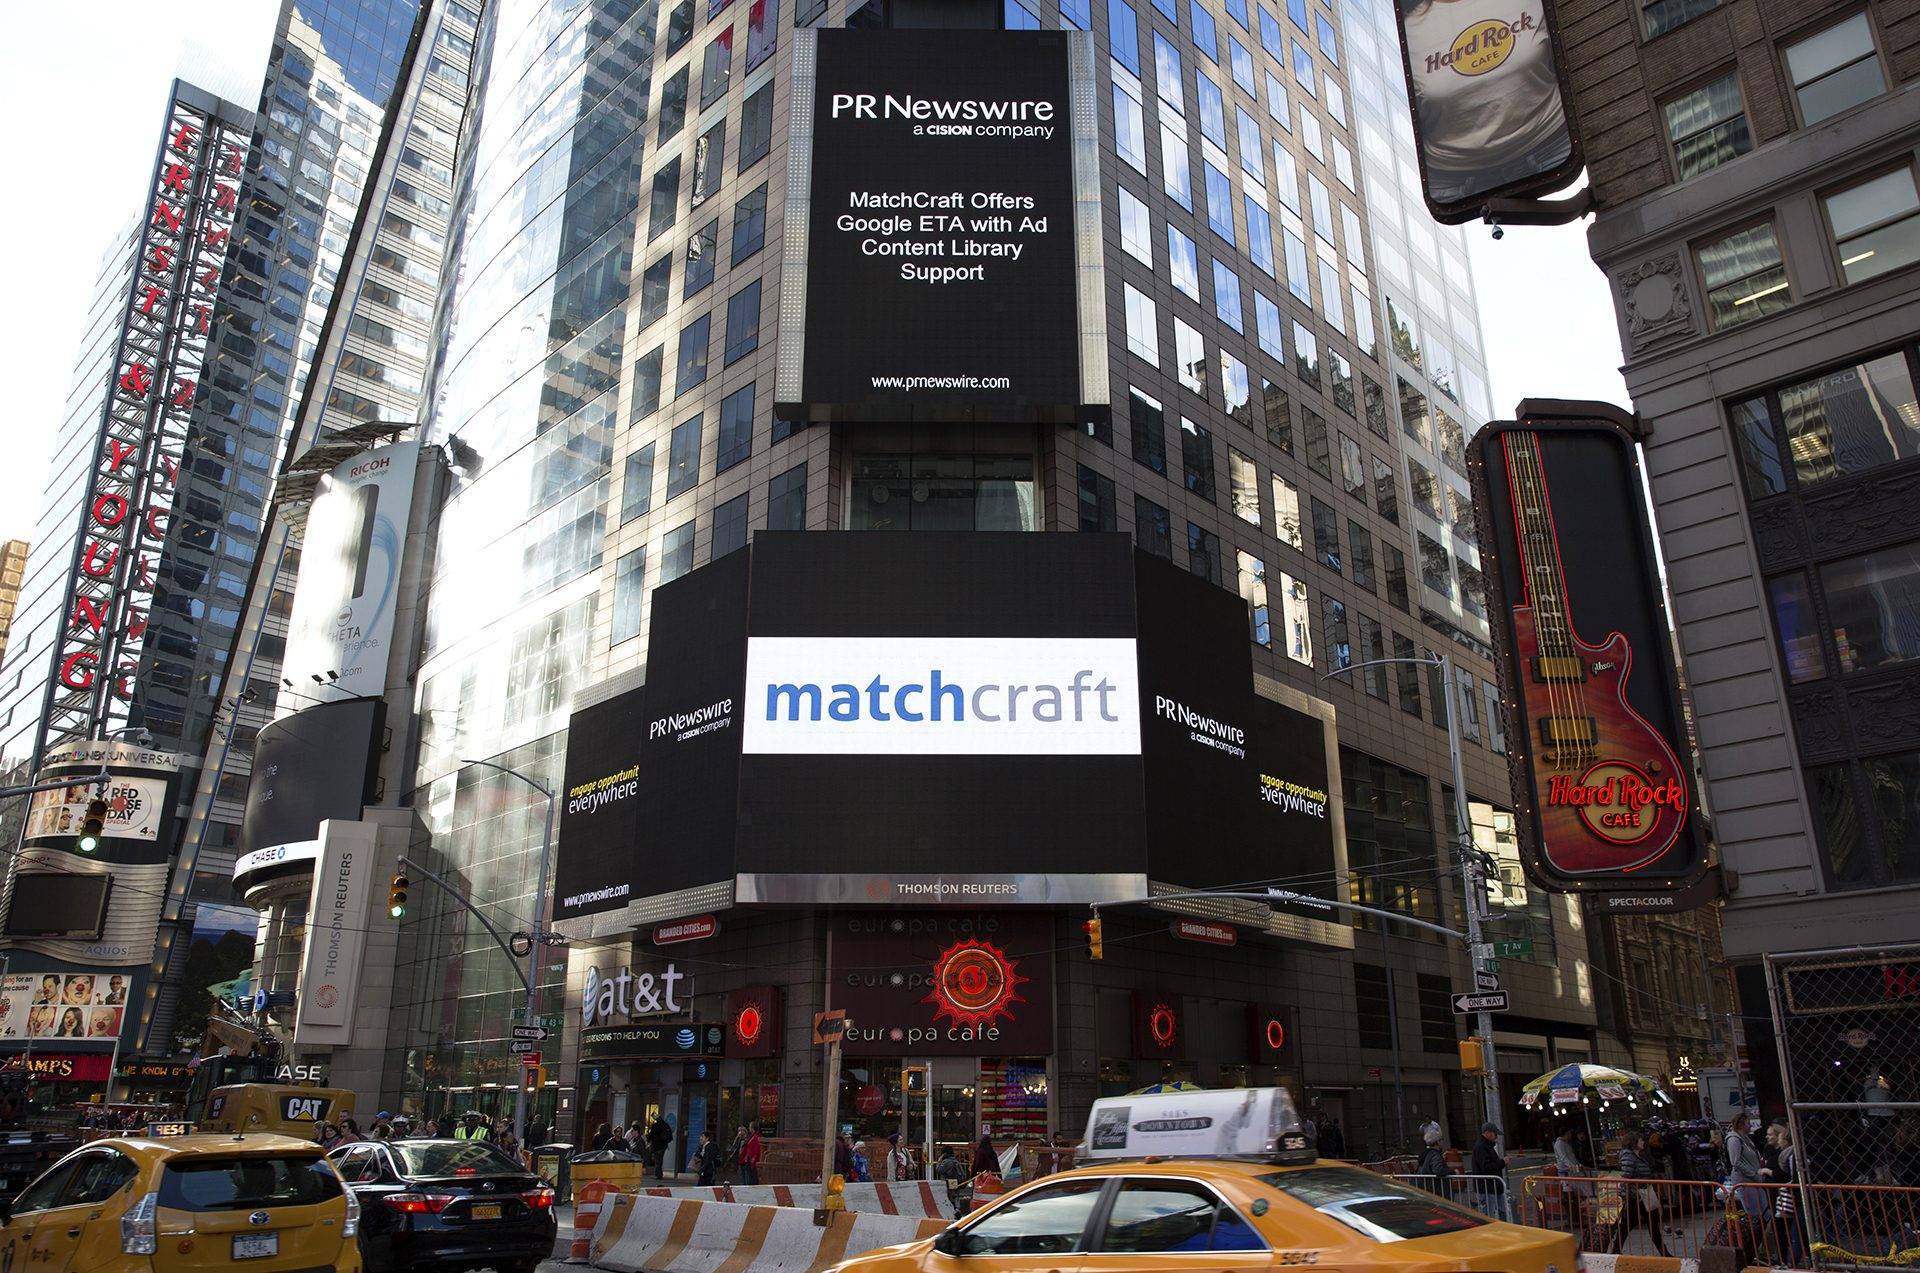 MatchCraft Offers Google ETA with Ad Content Library Support